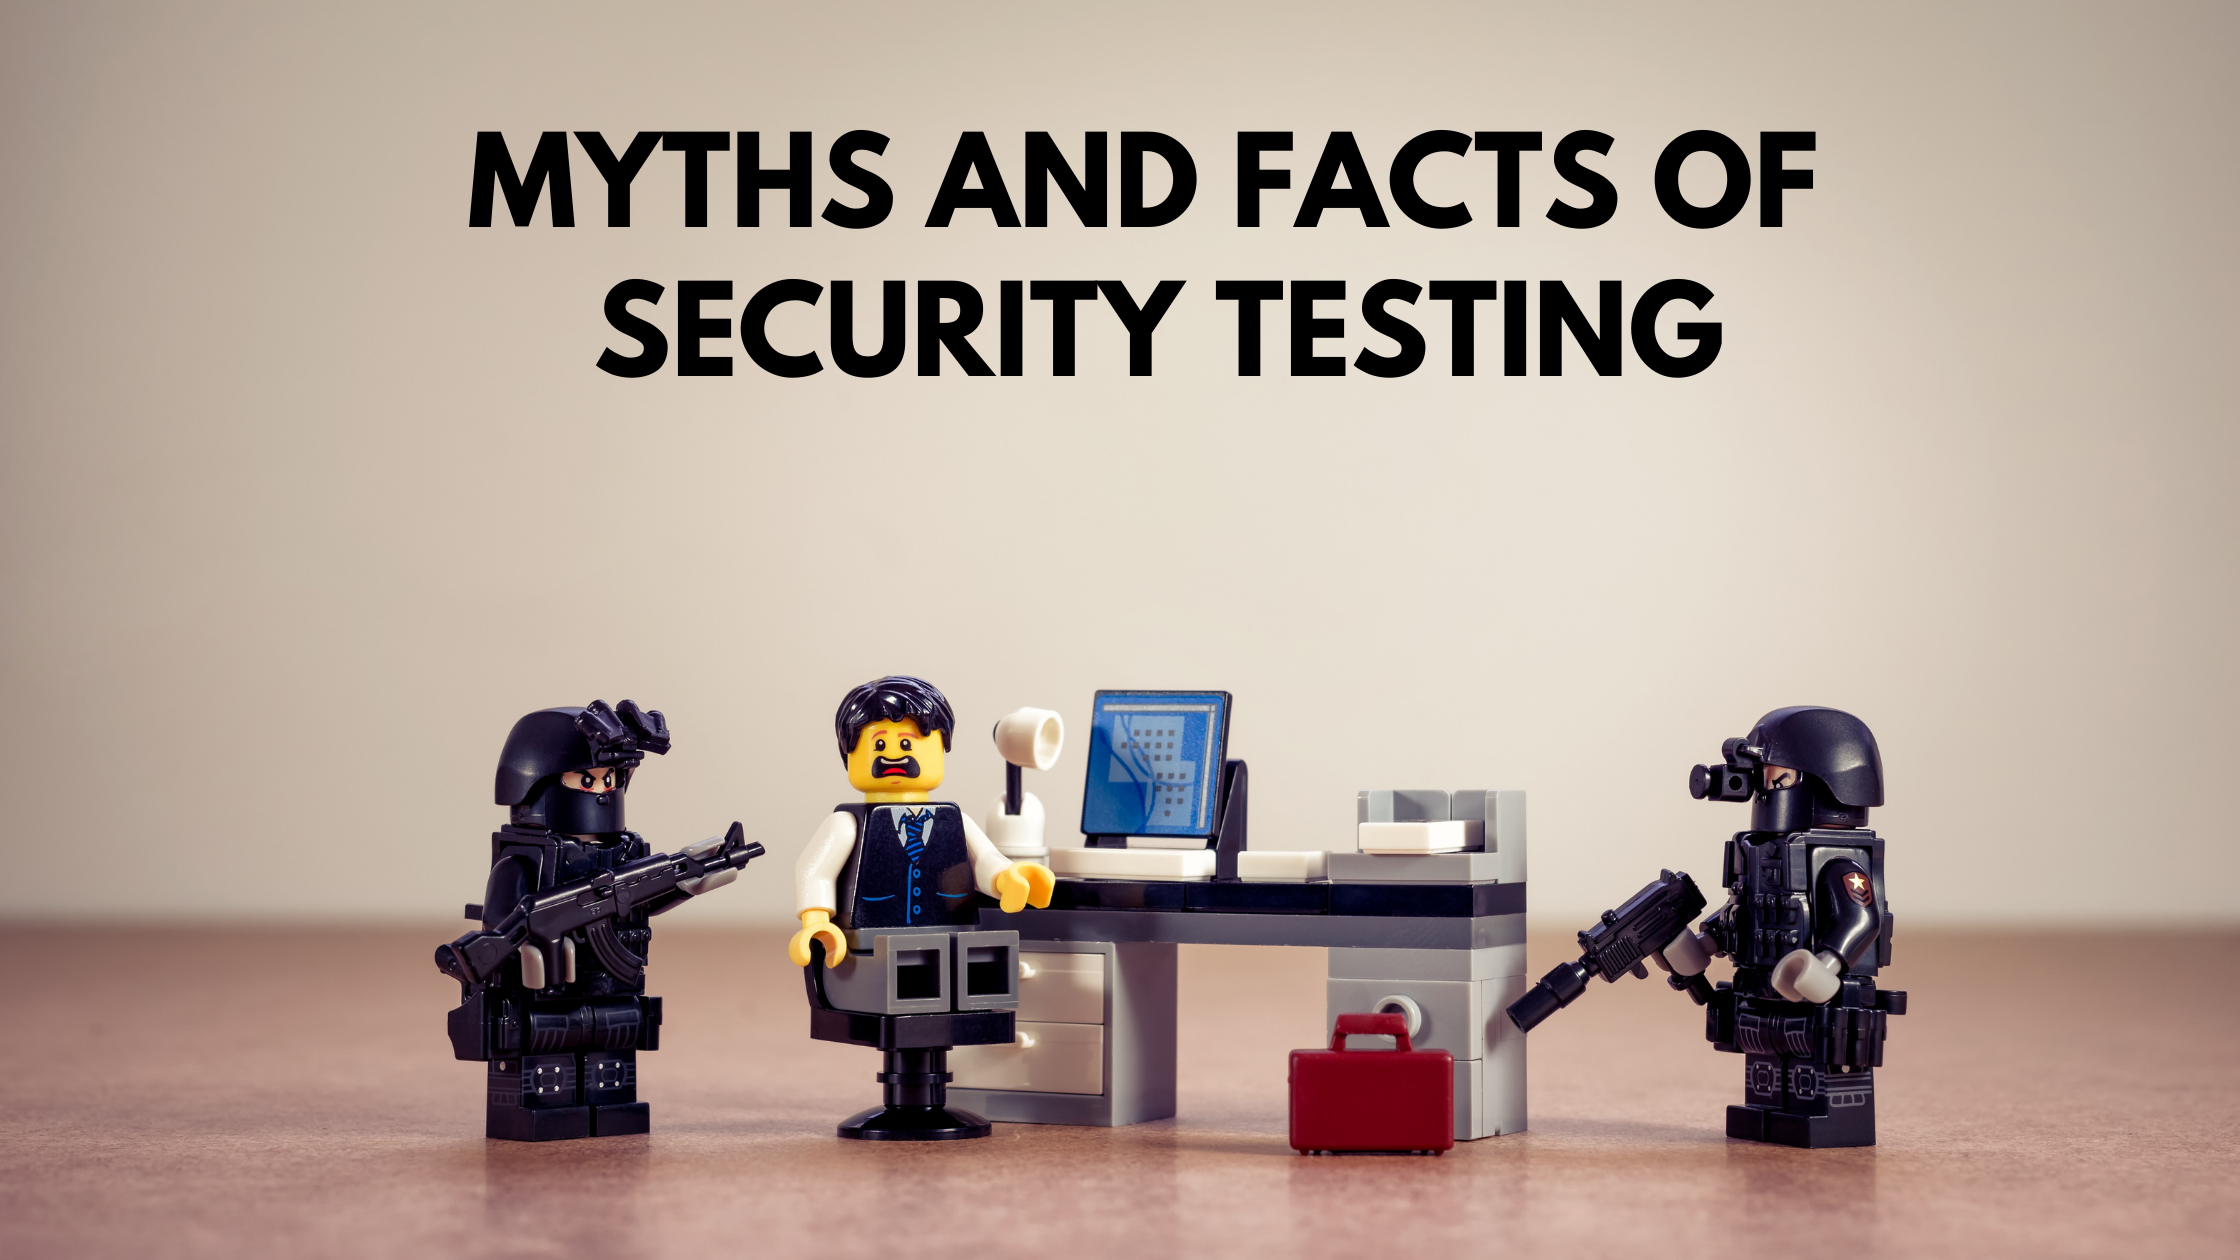 Myths and Facts of Security Testing